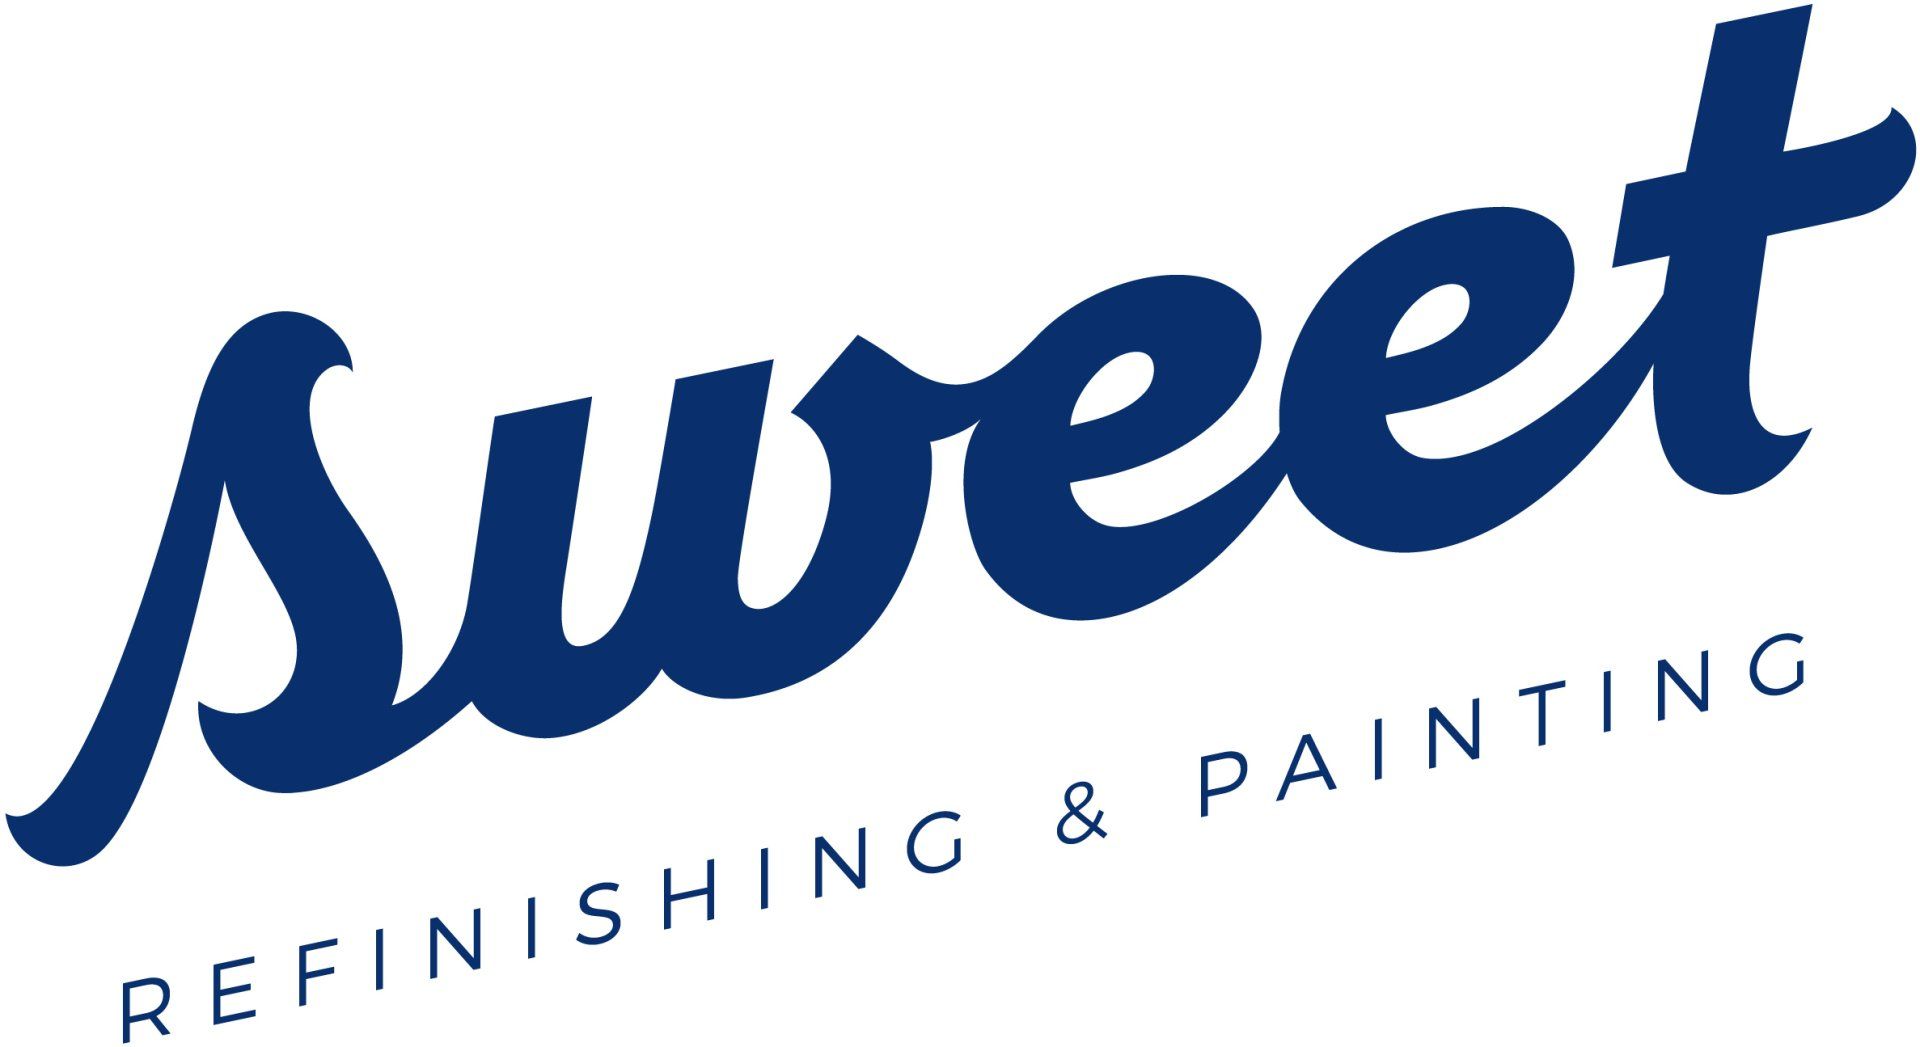 A blue logo for sweet refinishing and painting